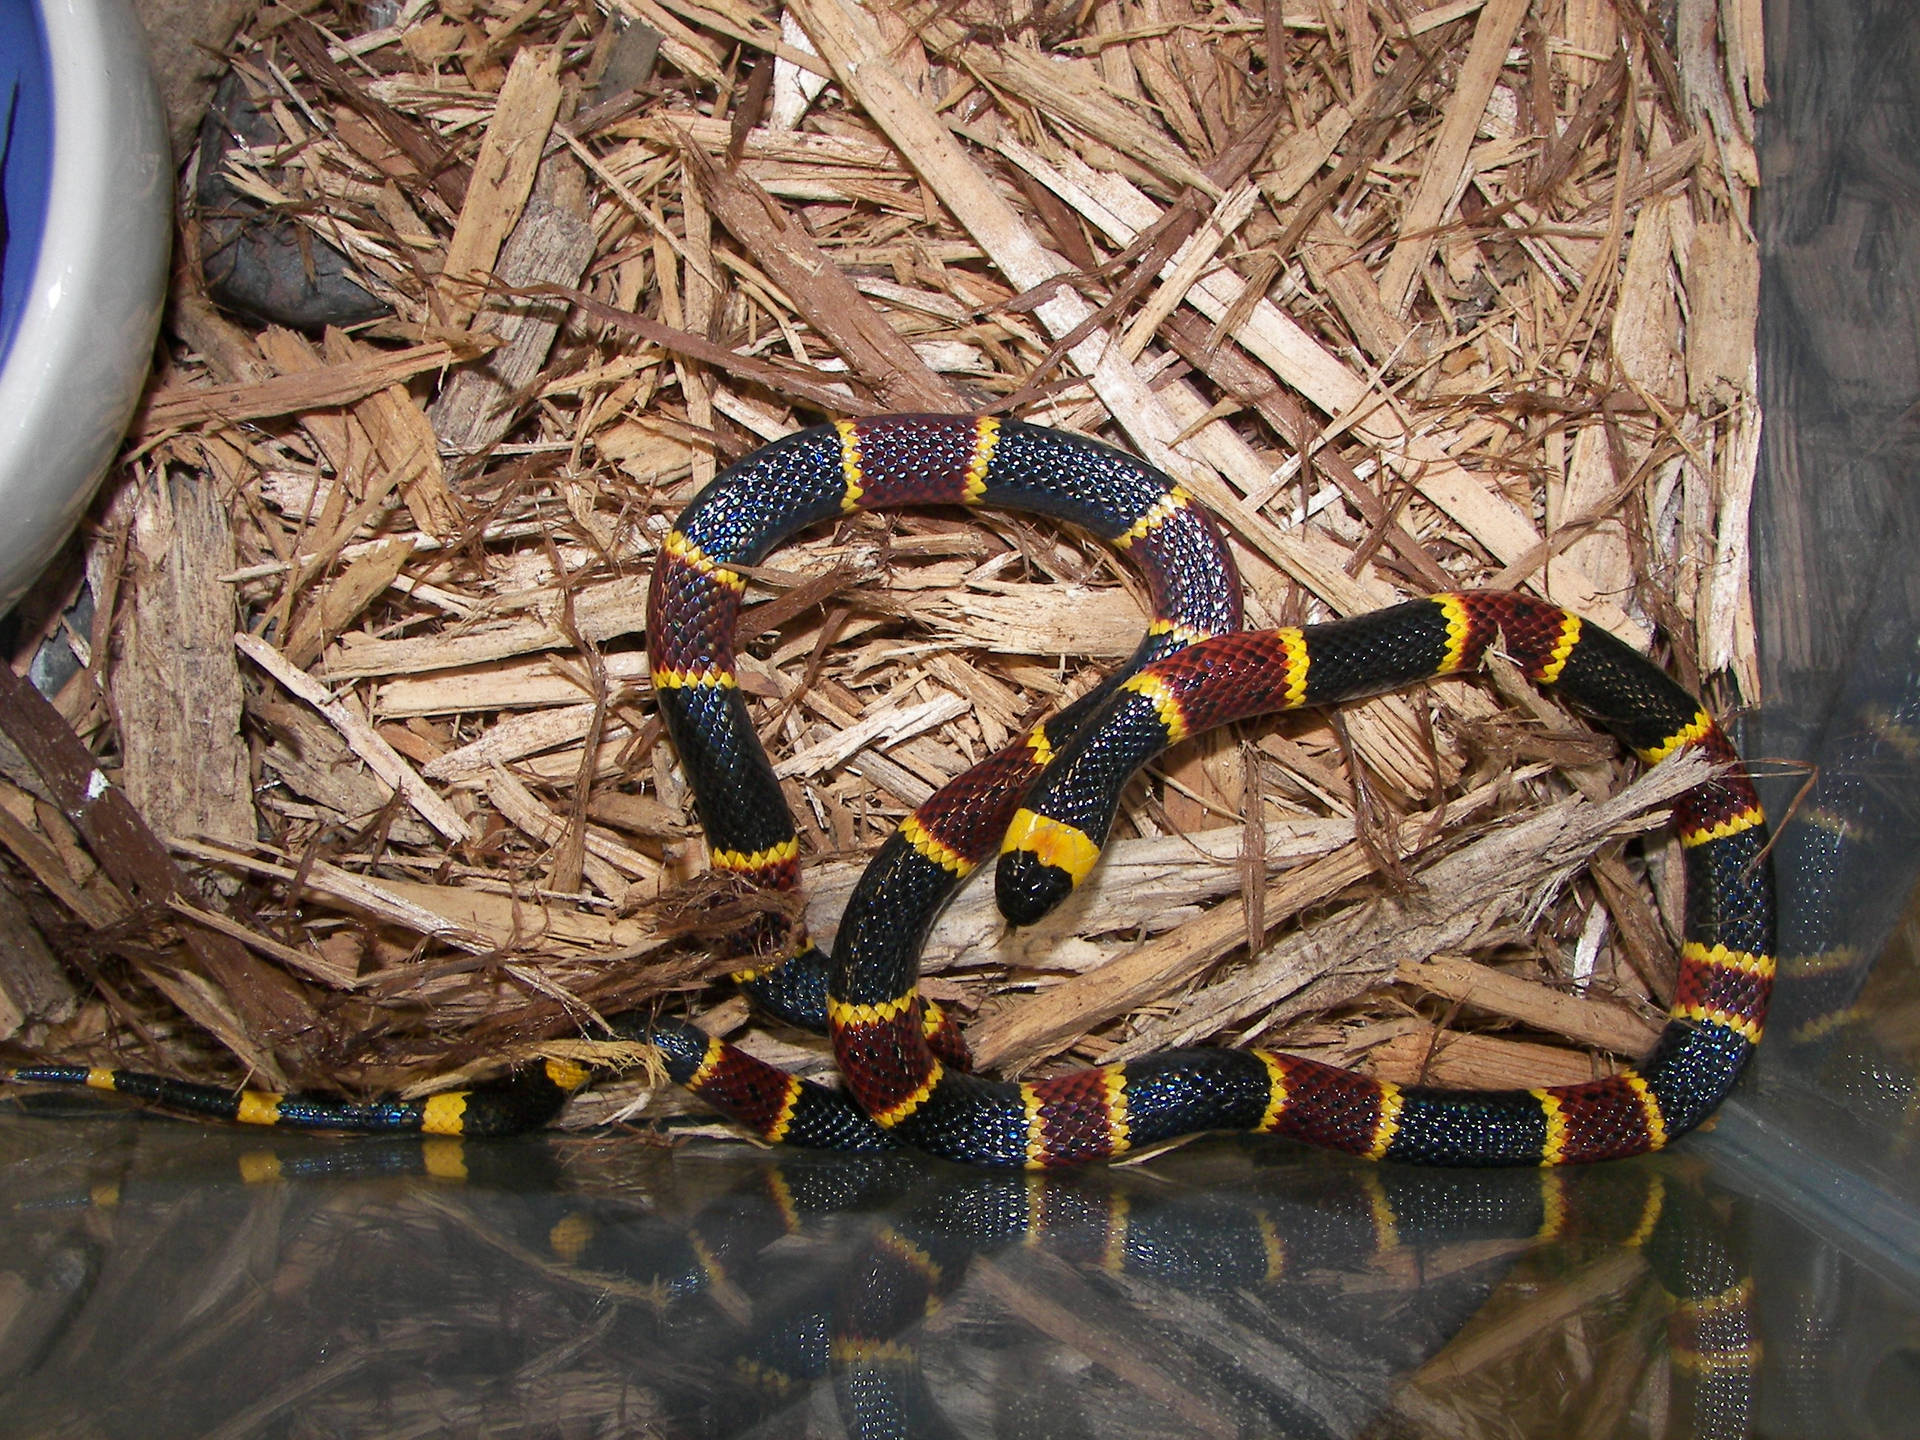 Eastern Coral Snake On Glass Cage Wallpaper